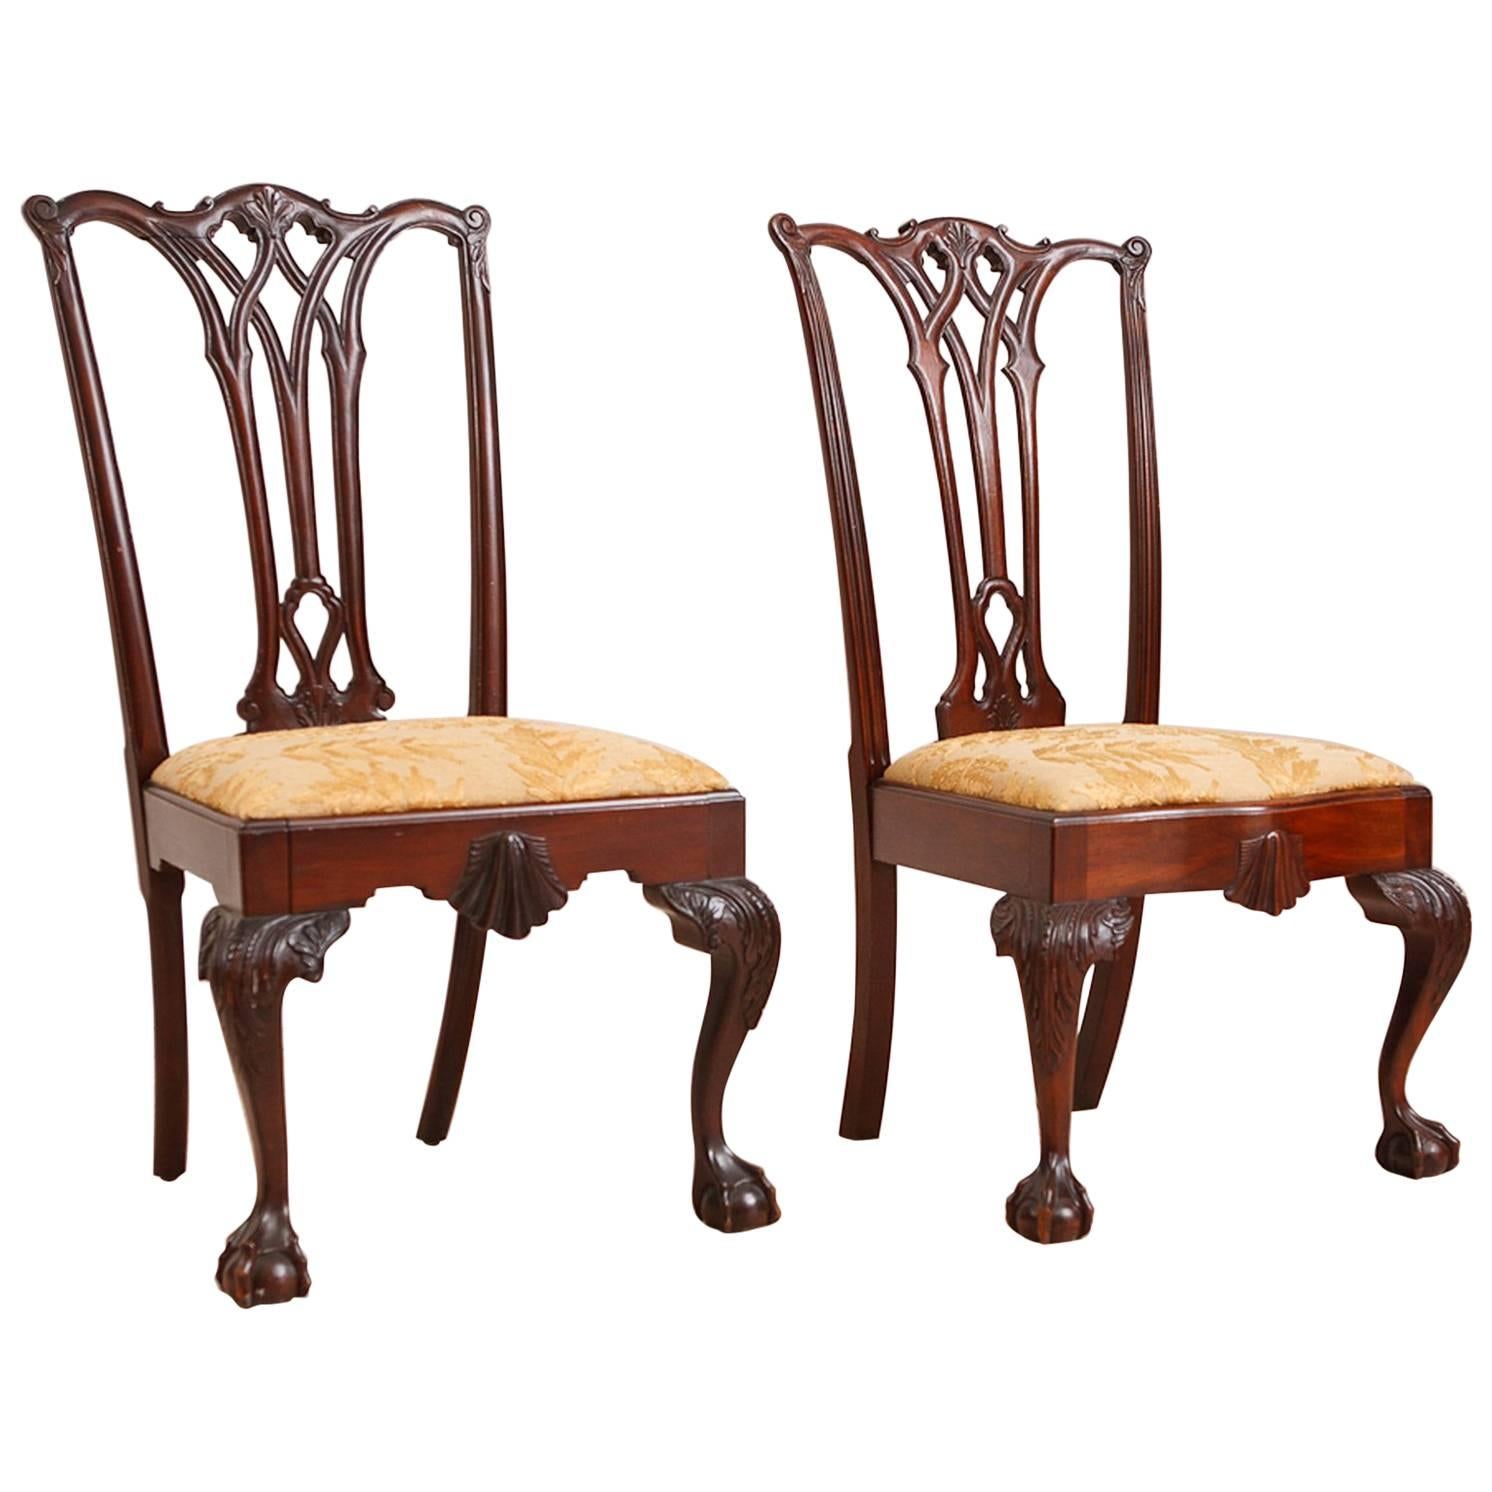 2 Centennial Philadelphia Chippendale-Style Chairs in Mahogany, circa 1870